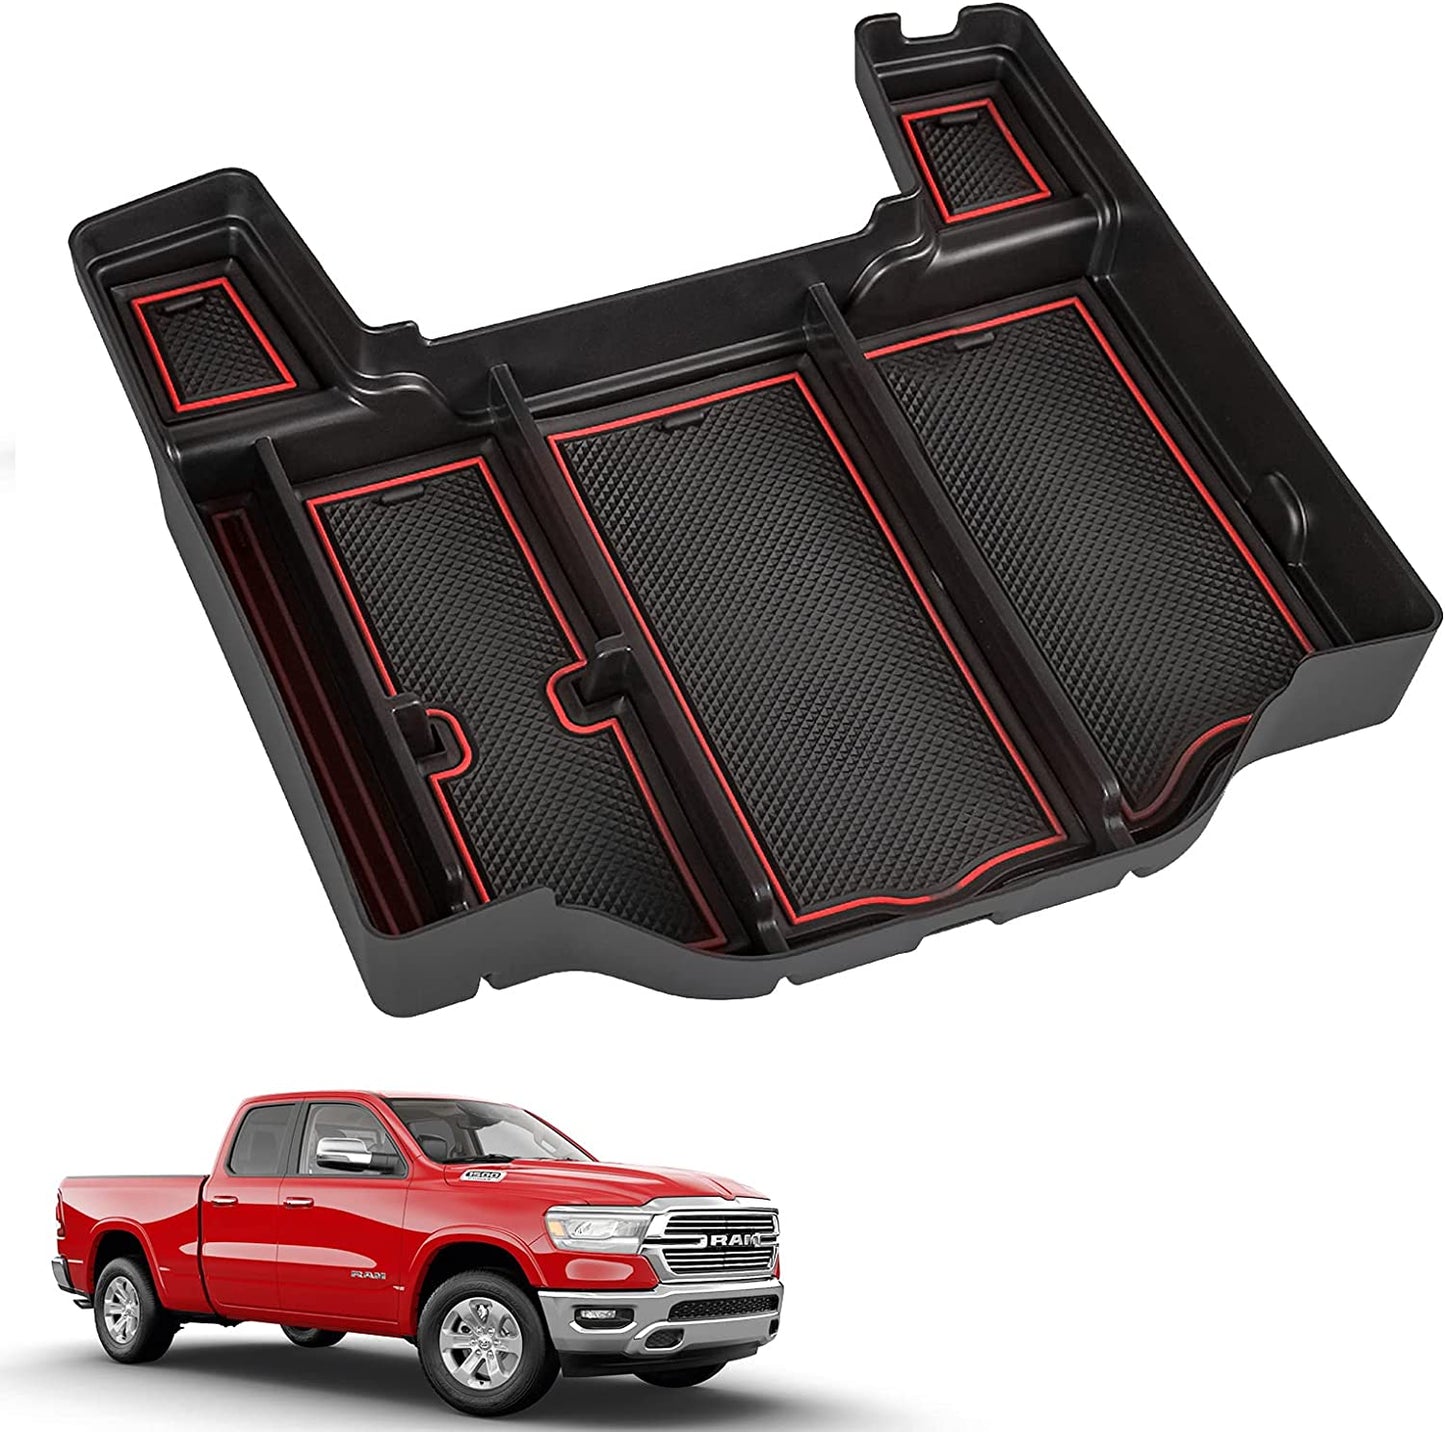 Upgraded Center Console Organizer Tray for 2019-2023 Dodge RAM 1500 2500 3500